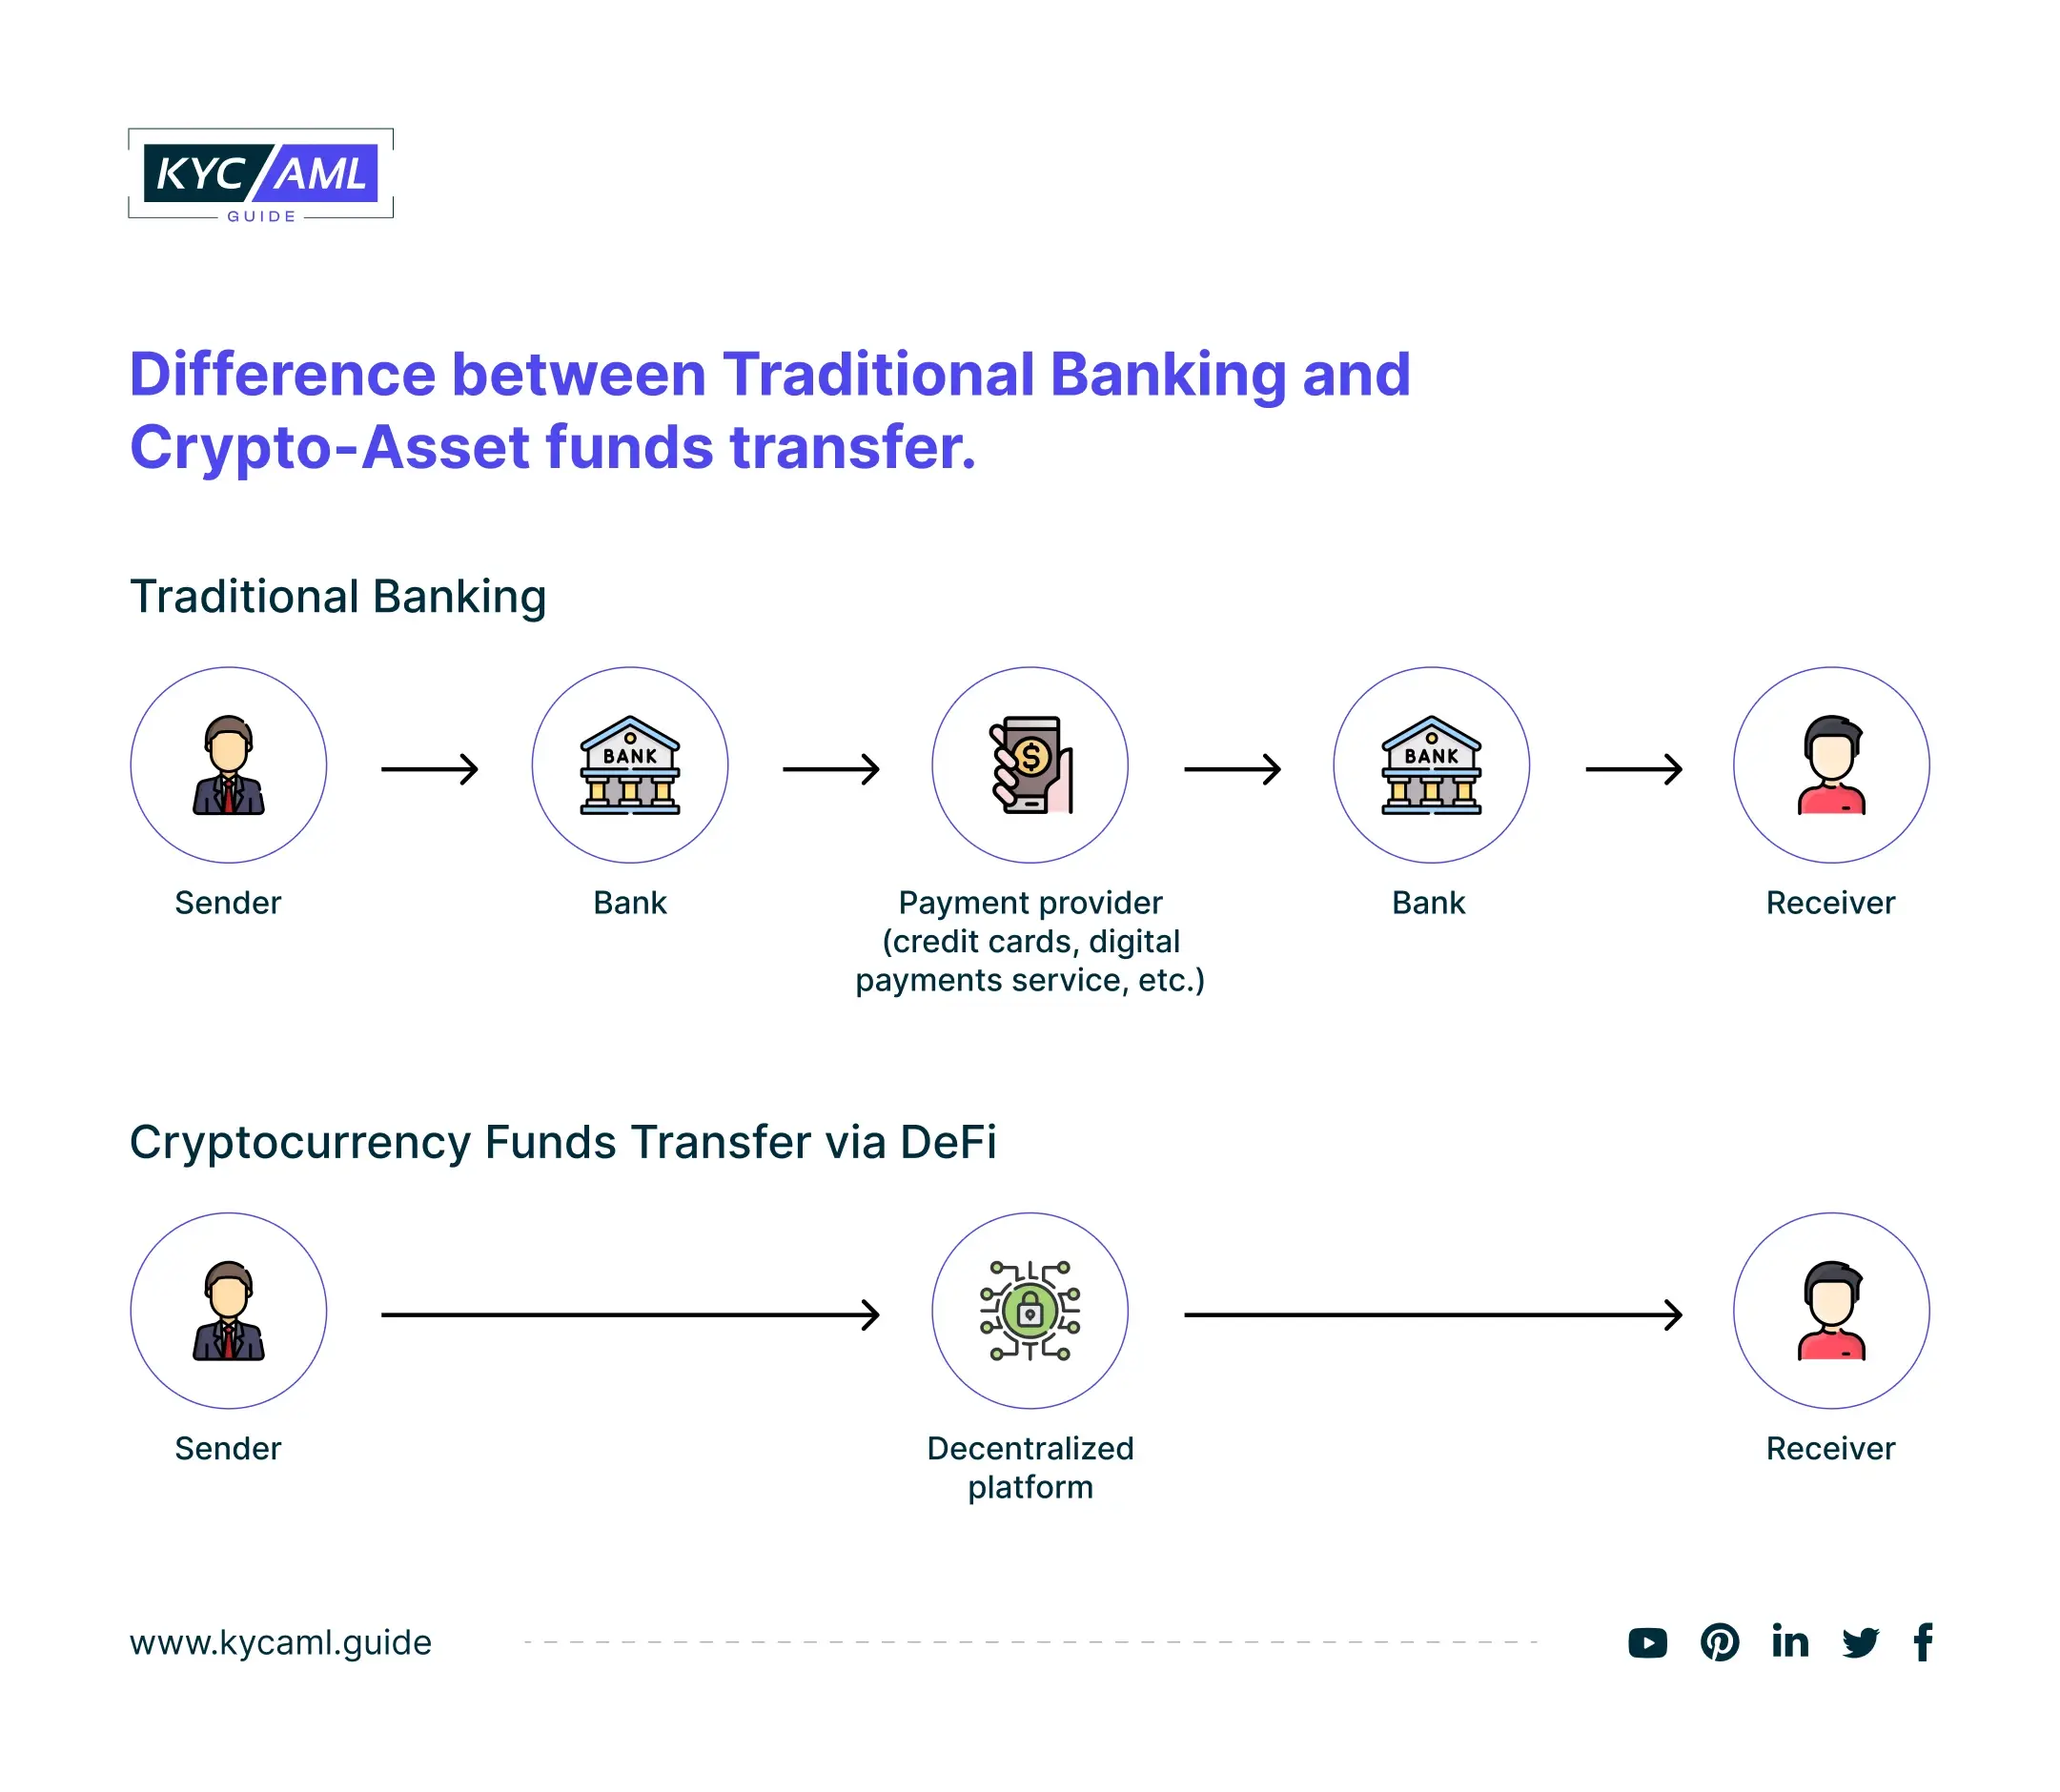 Difference between Traditional Banking and Crypto-Asset funds transfer